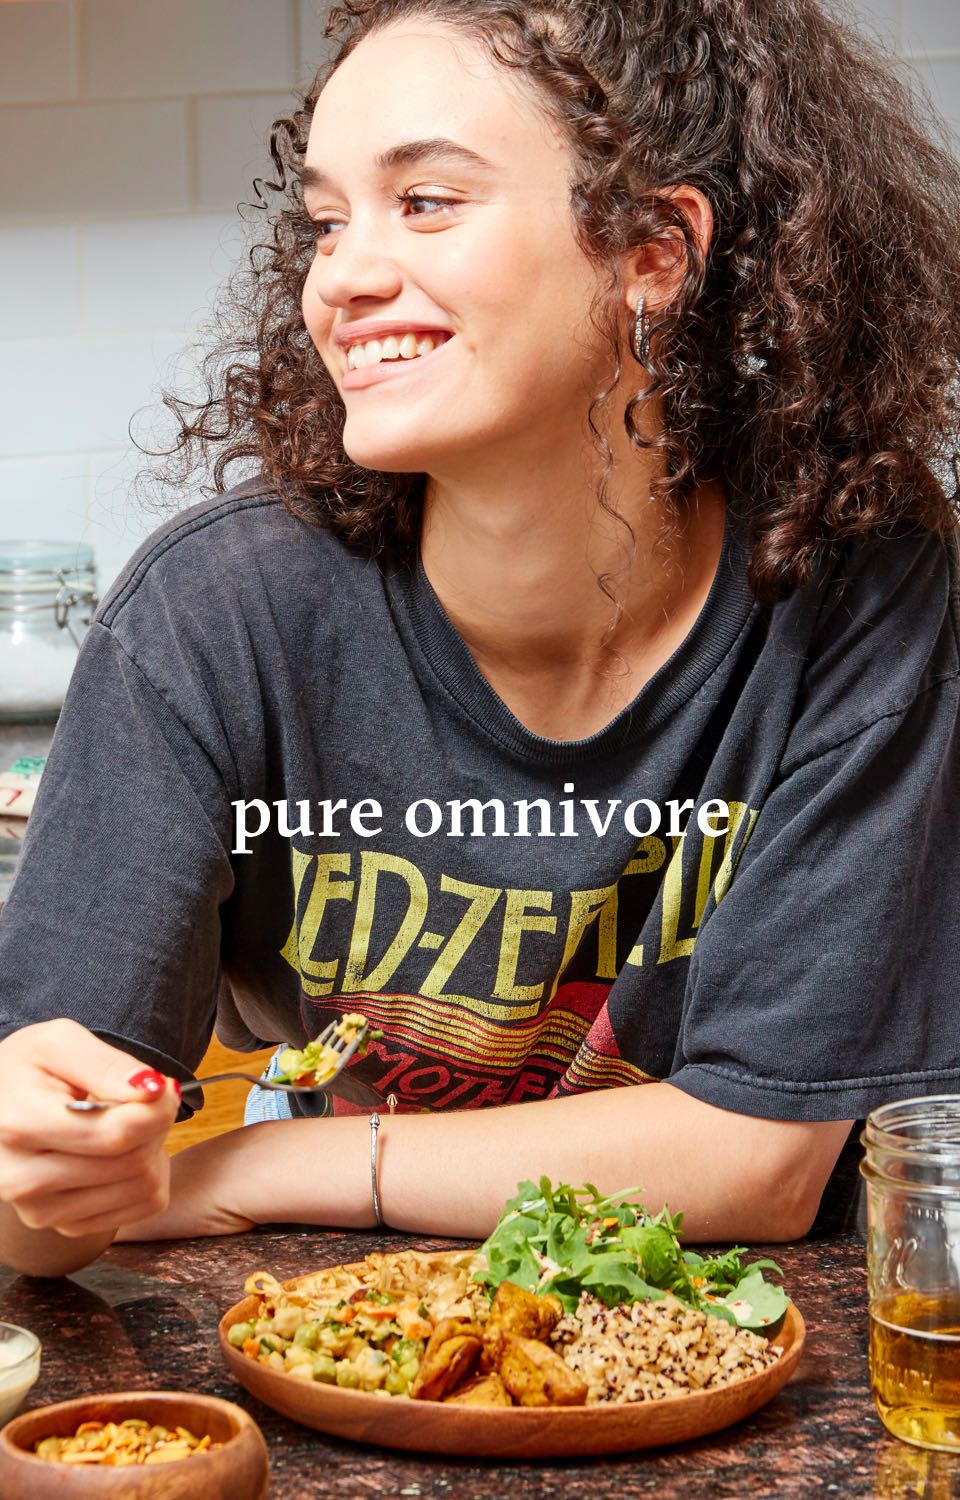 Woman smiling and eating a plate of food. Headline reads Pure Omnivores